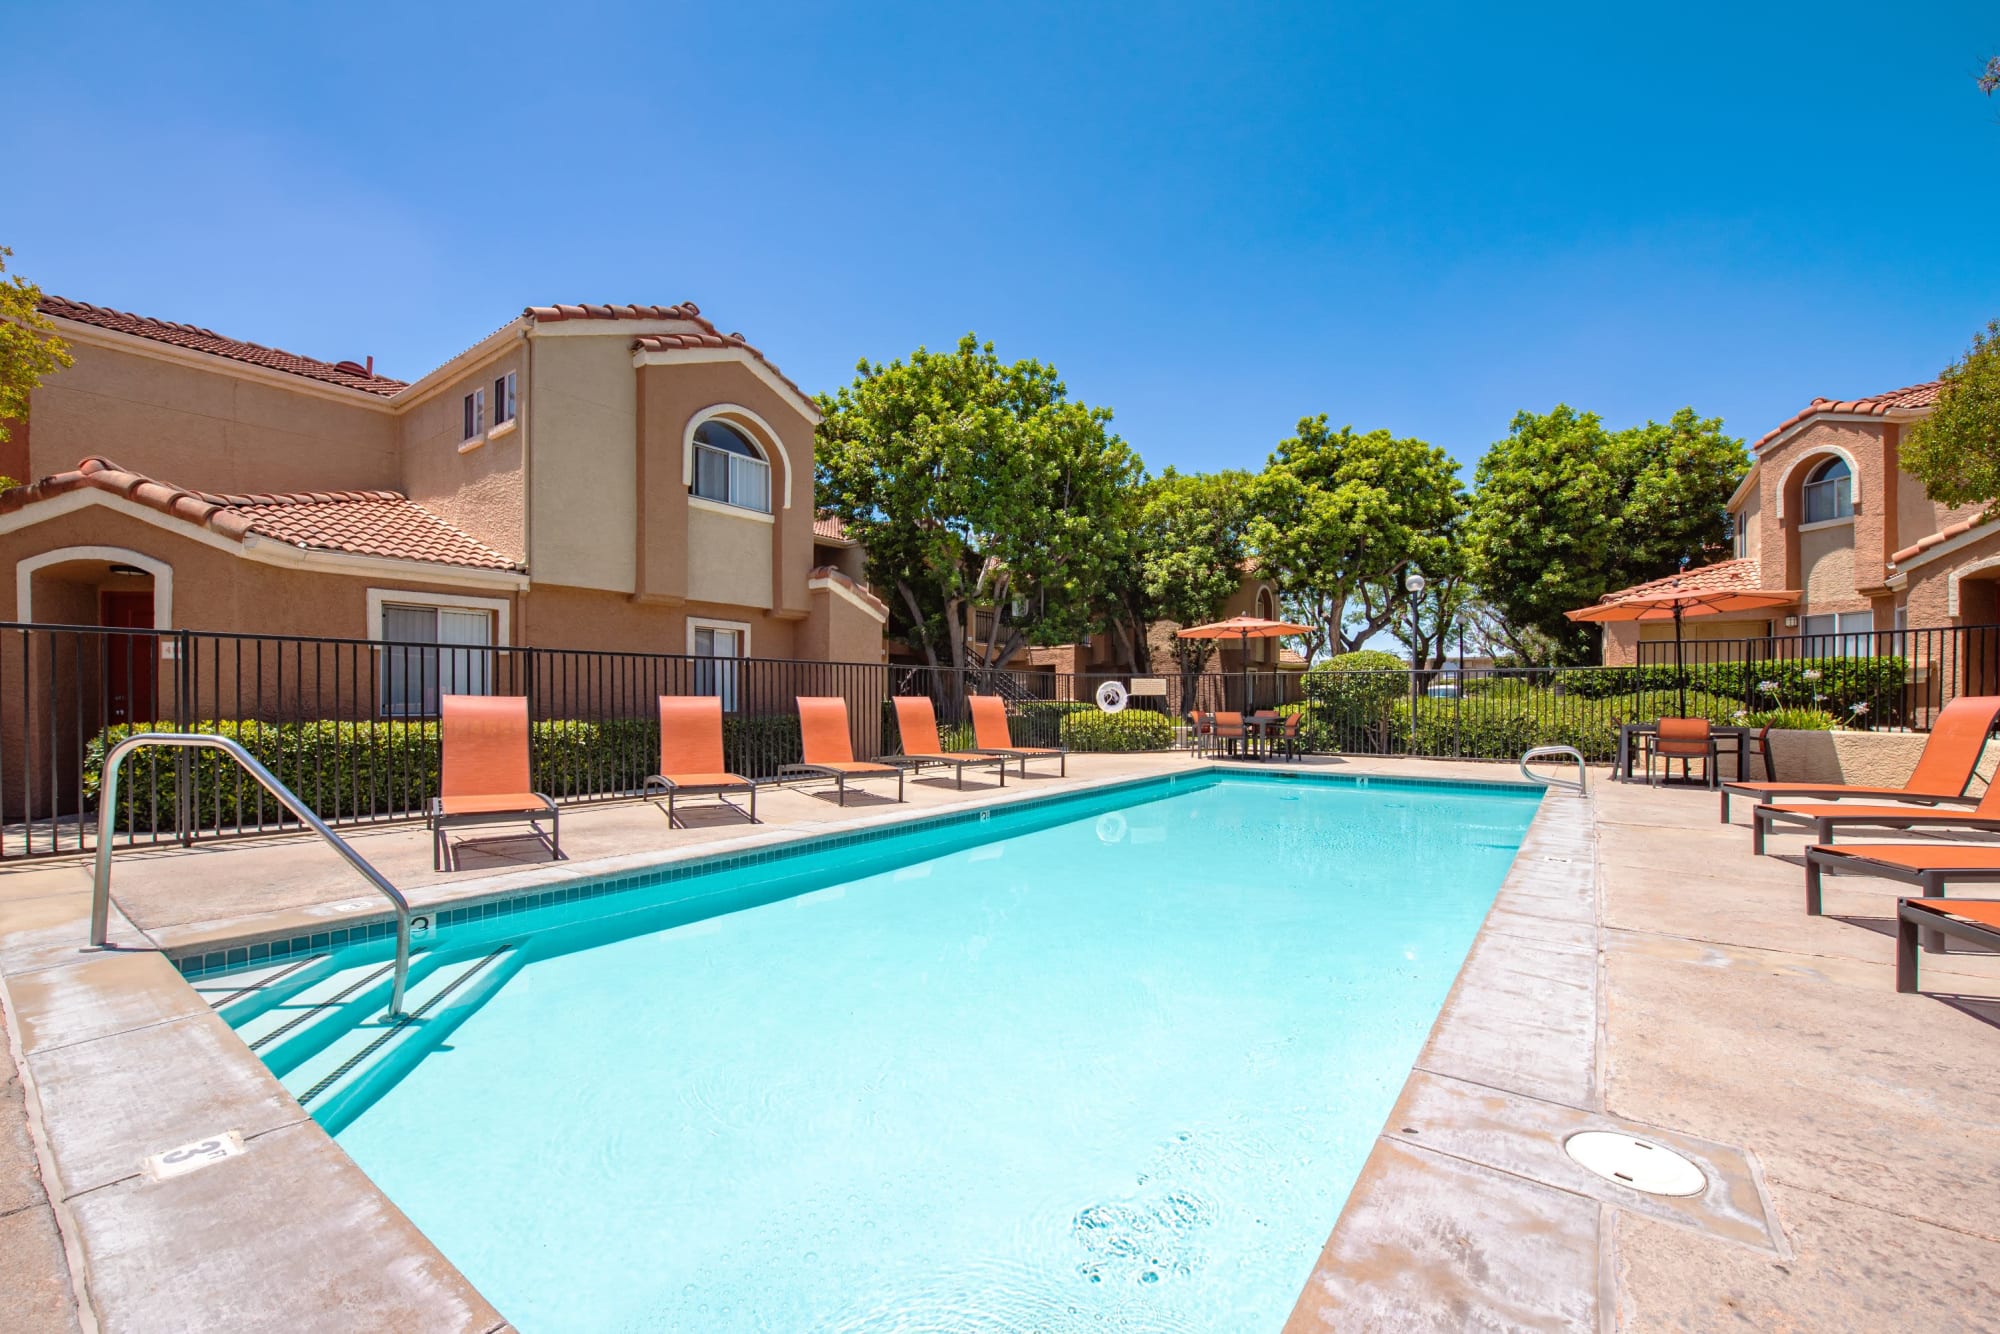 Onsite pool at Tuscany Village Apartments in Ontario, California